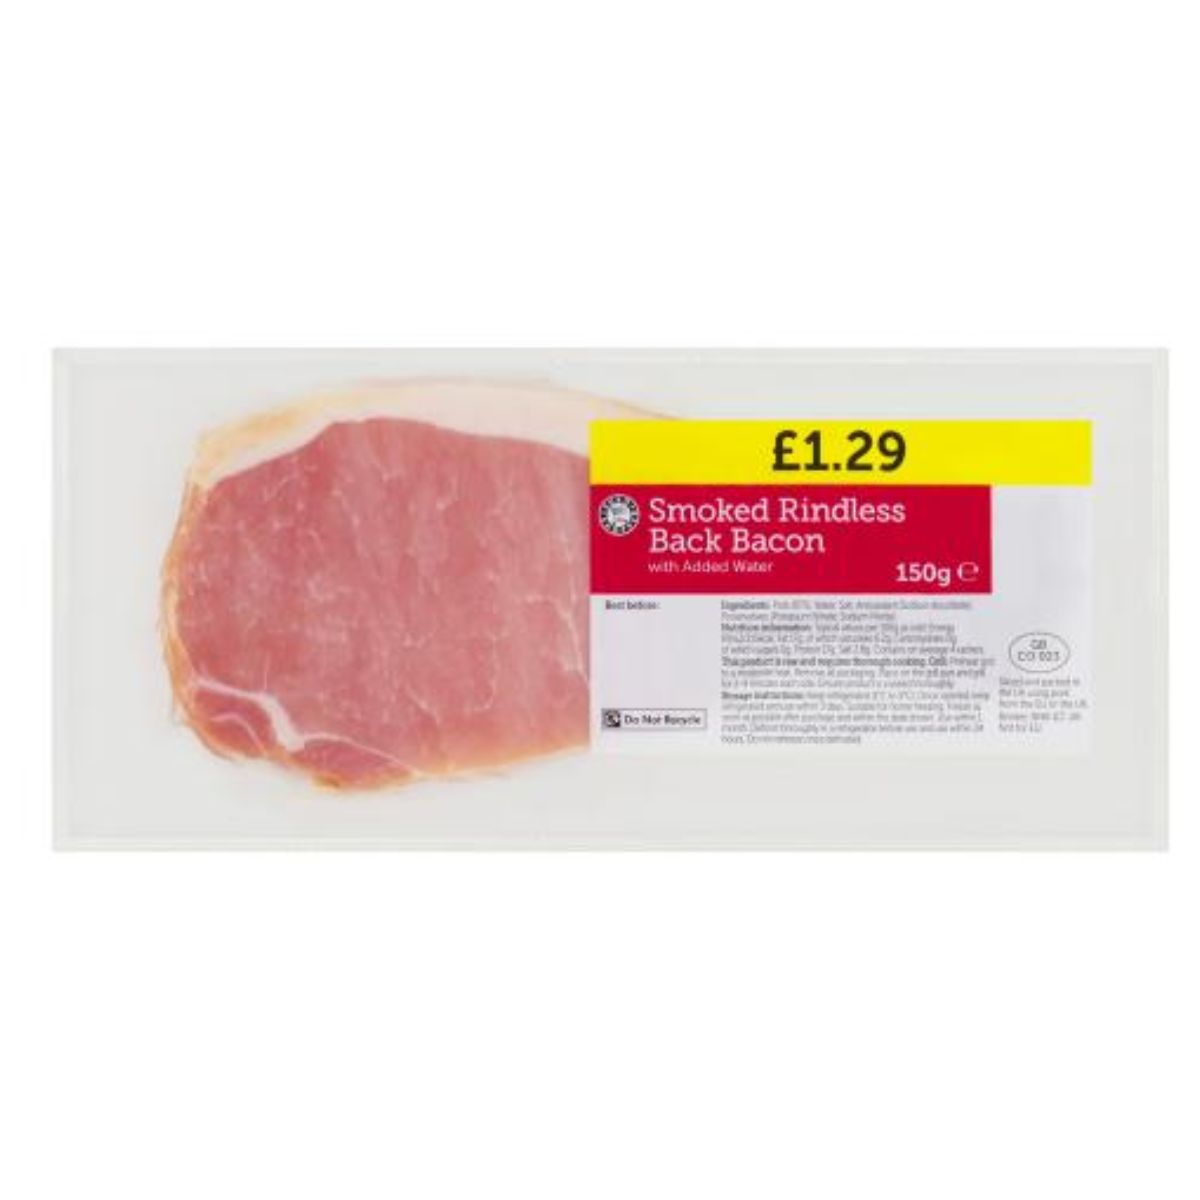 A Euro Shopper - Smoked Rindless Back Bacon with Added Water - 150g with a price tag on it.